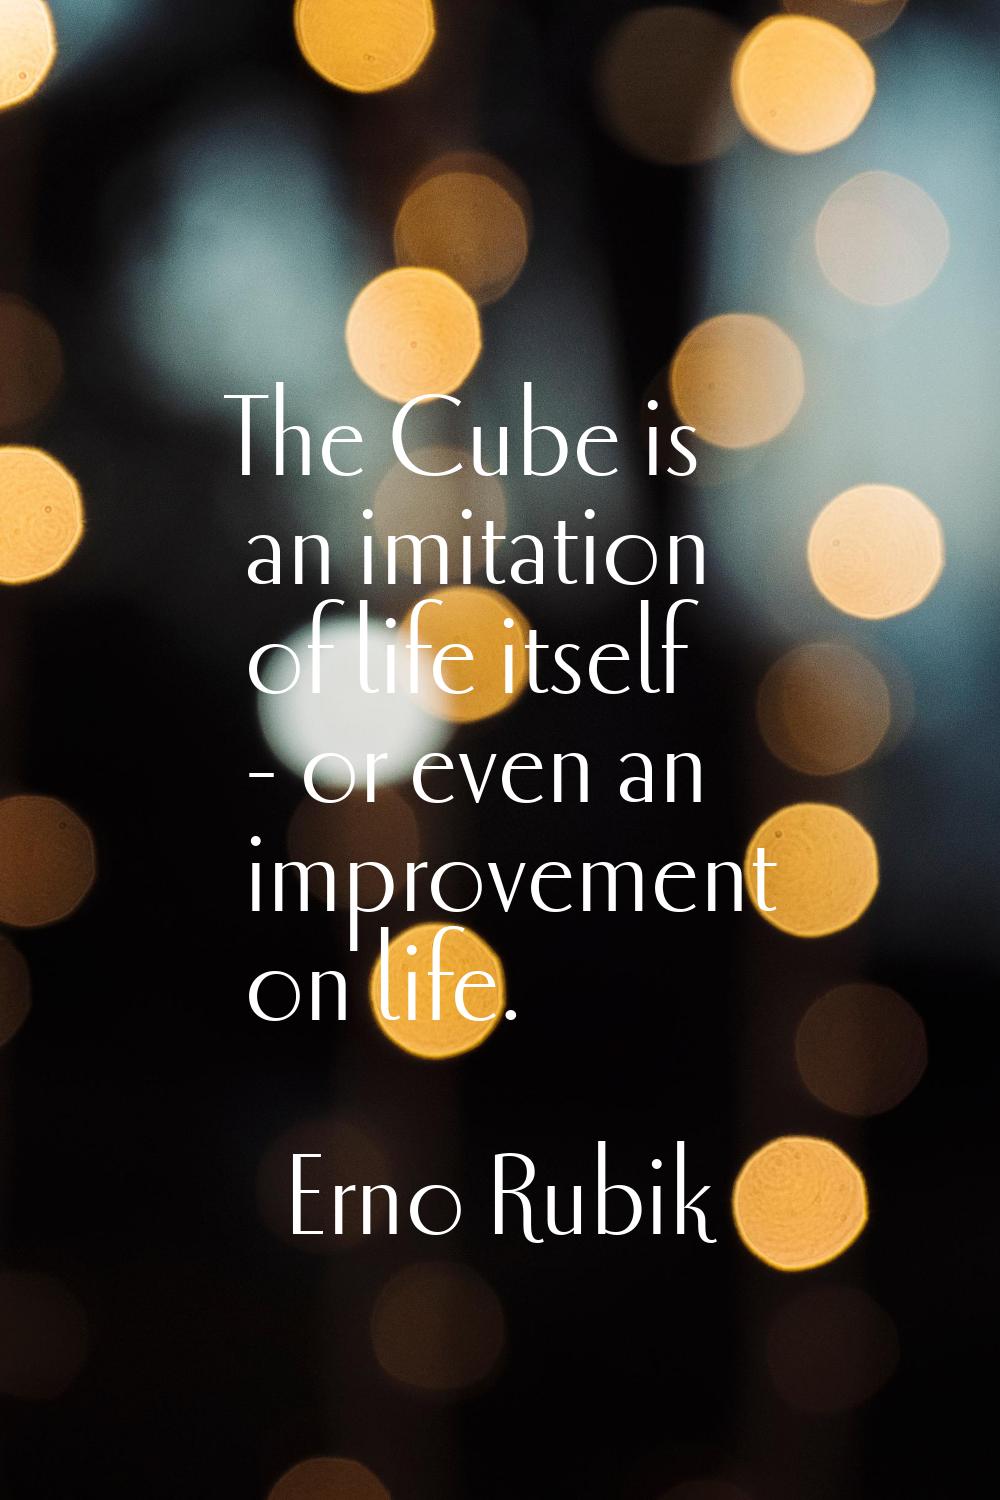 The Cube is an imitation of life itself - or even an improvement on life.